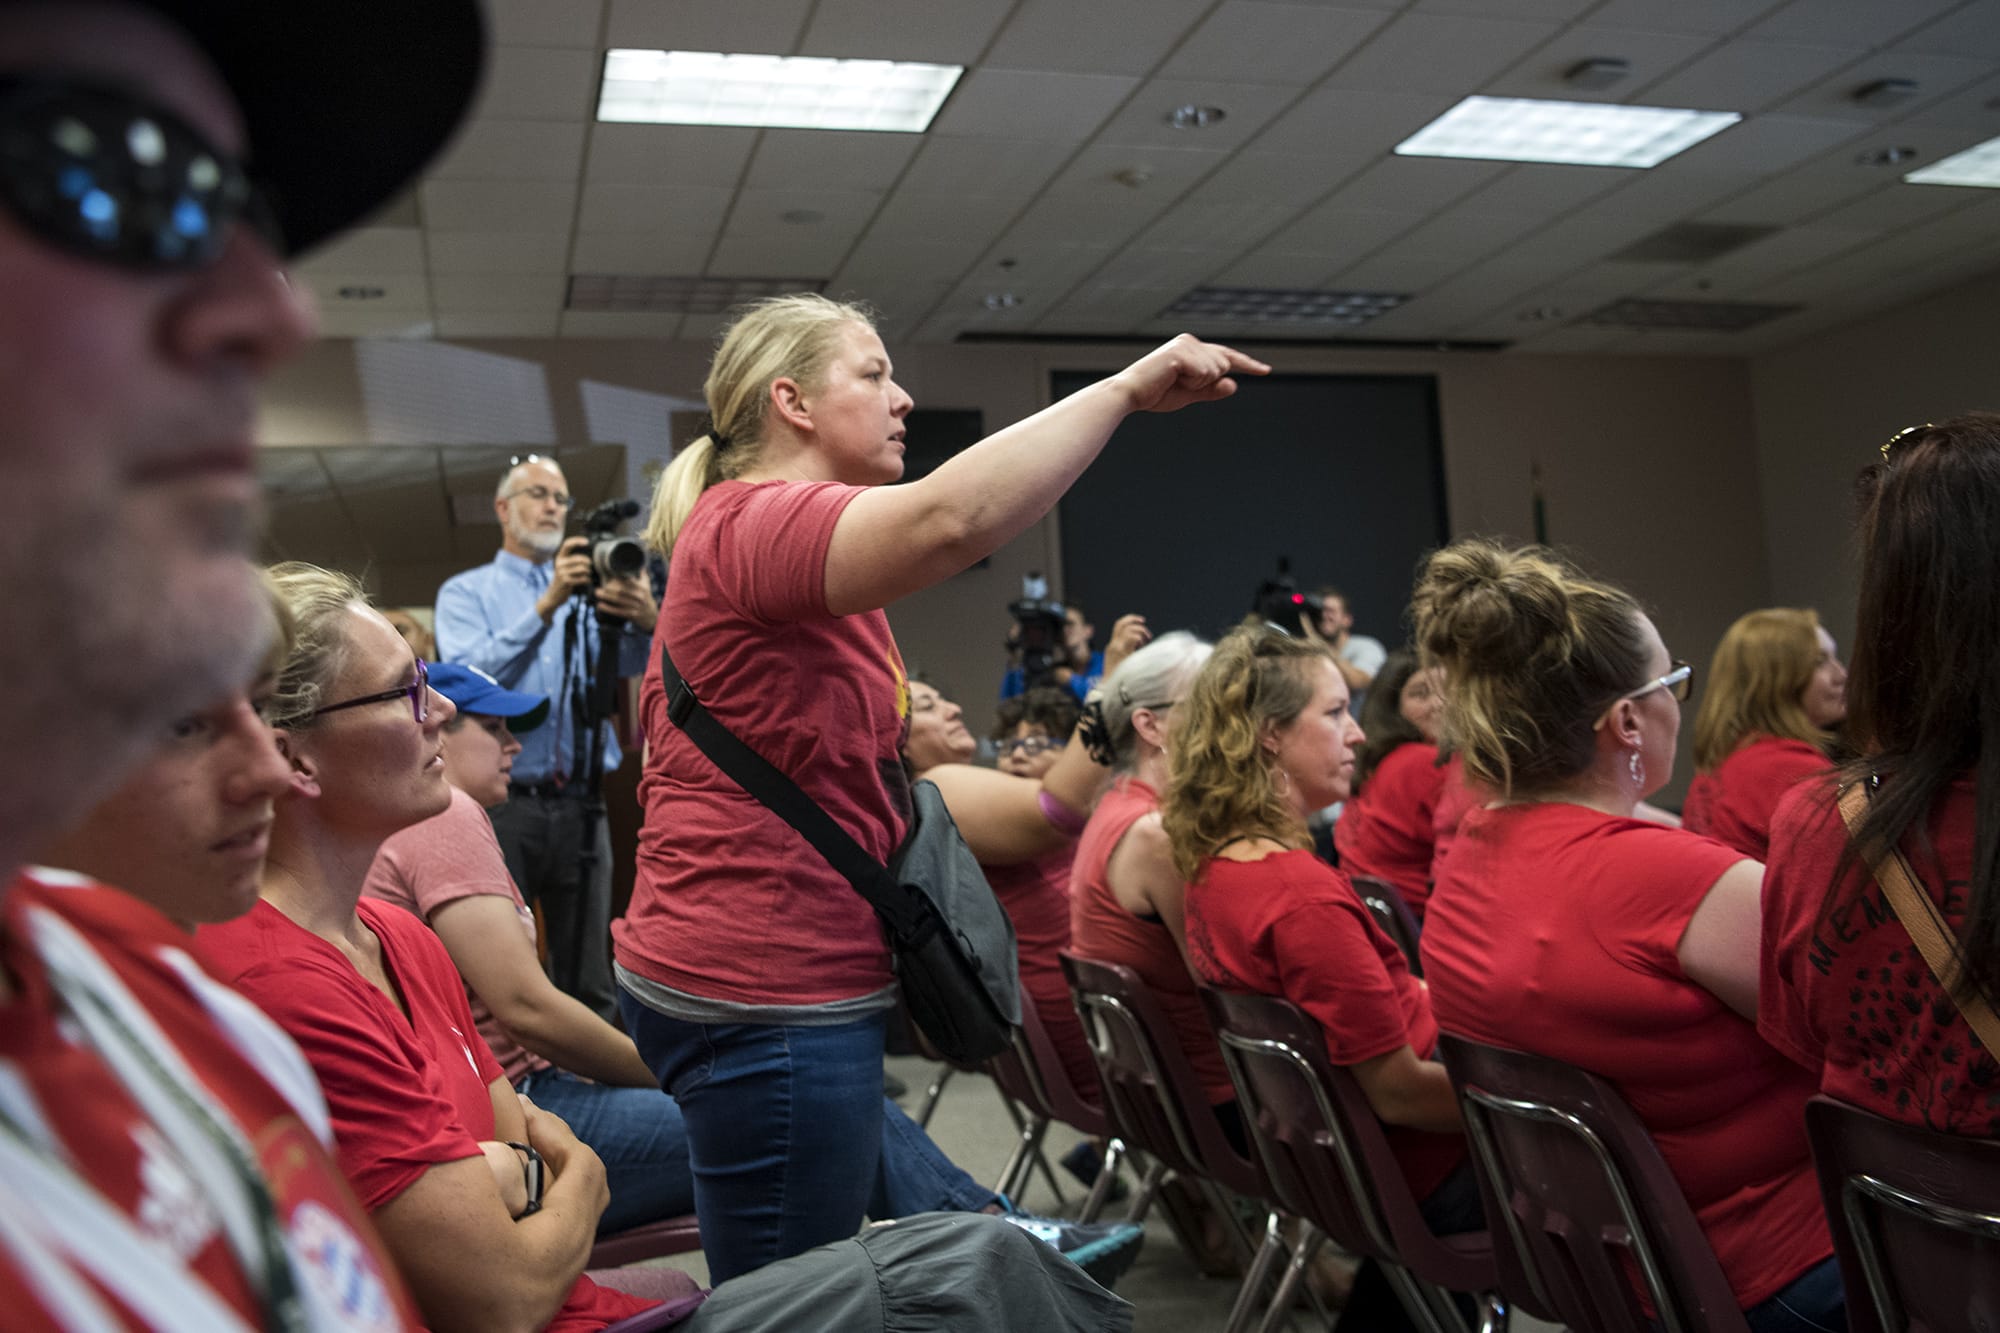 Katie Scot of Vancouver shouts out to the board as they call for a motion to move the meeting into another location during the Vancouver Public Schools board meeting on Tuesday. Scot's son attends Harney Elementary School, and Scot came to the meeting to support the teachers.